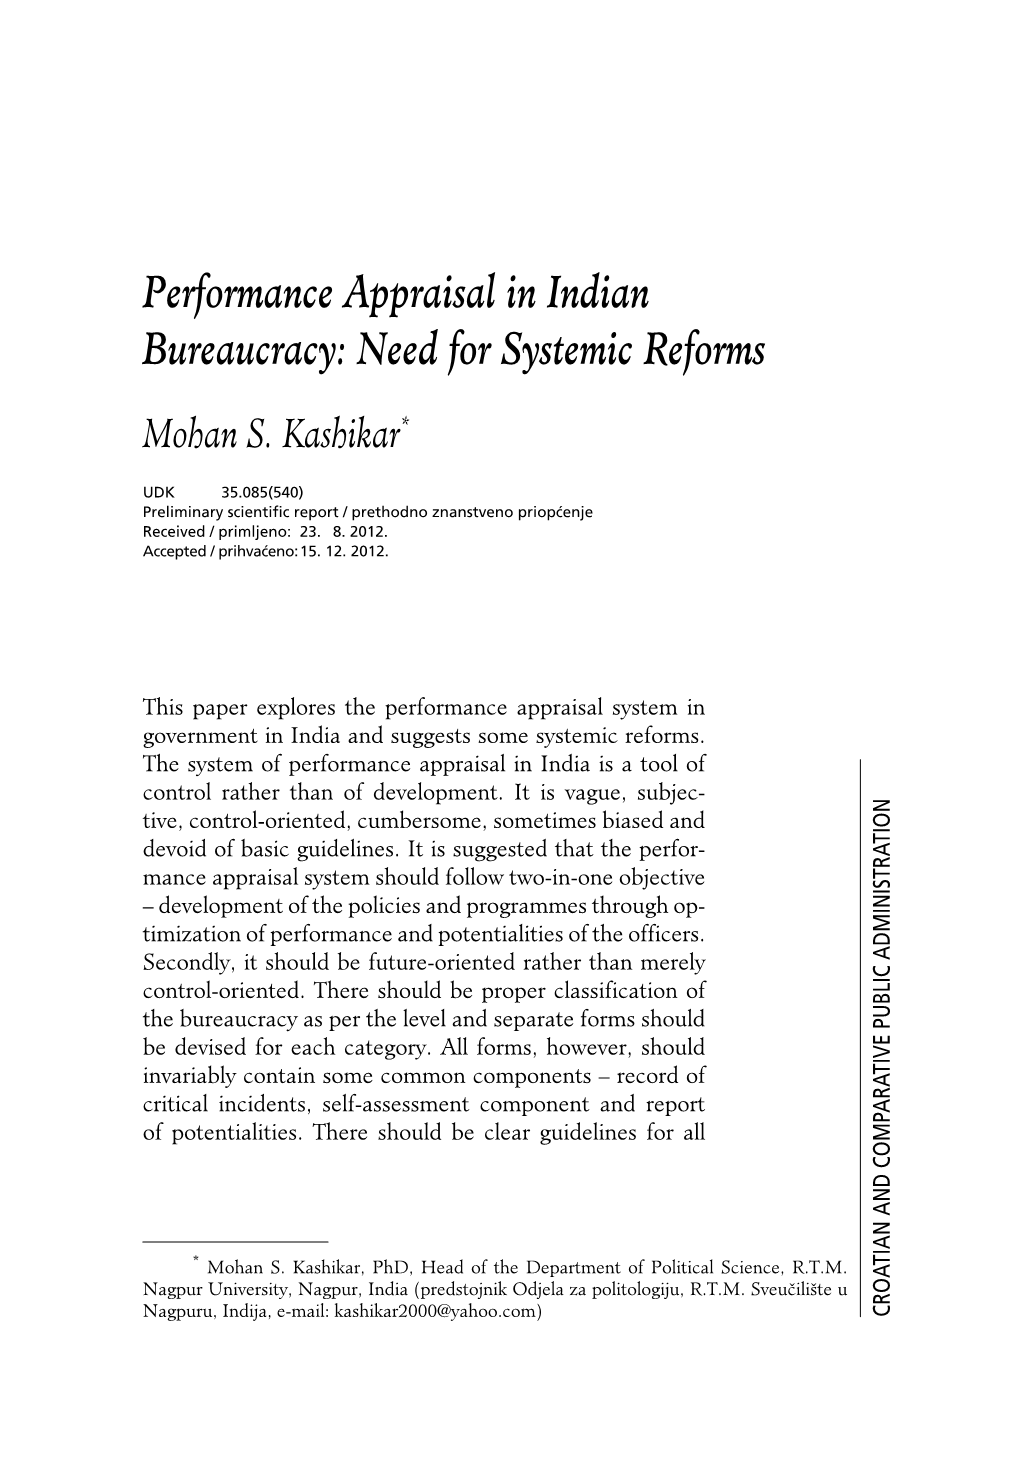 Performance Appraisal in Indian Bureaucracy: Need for Systemic Reforms